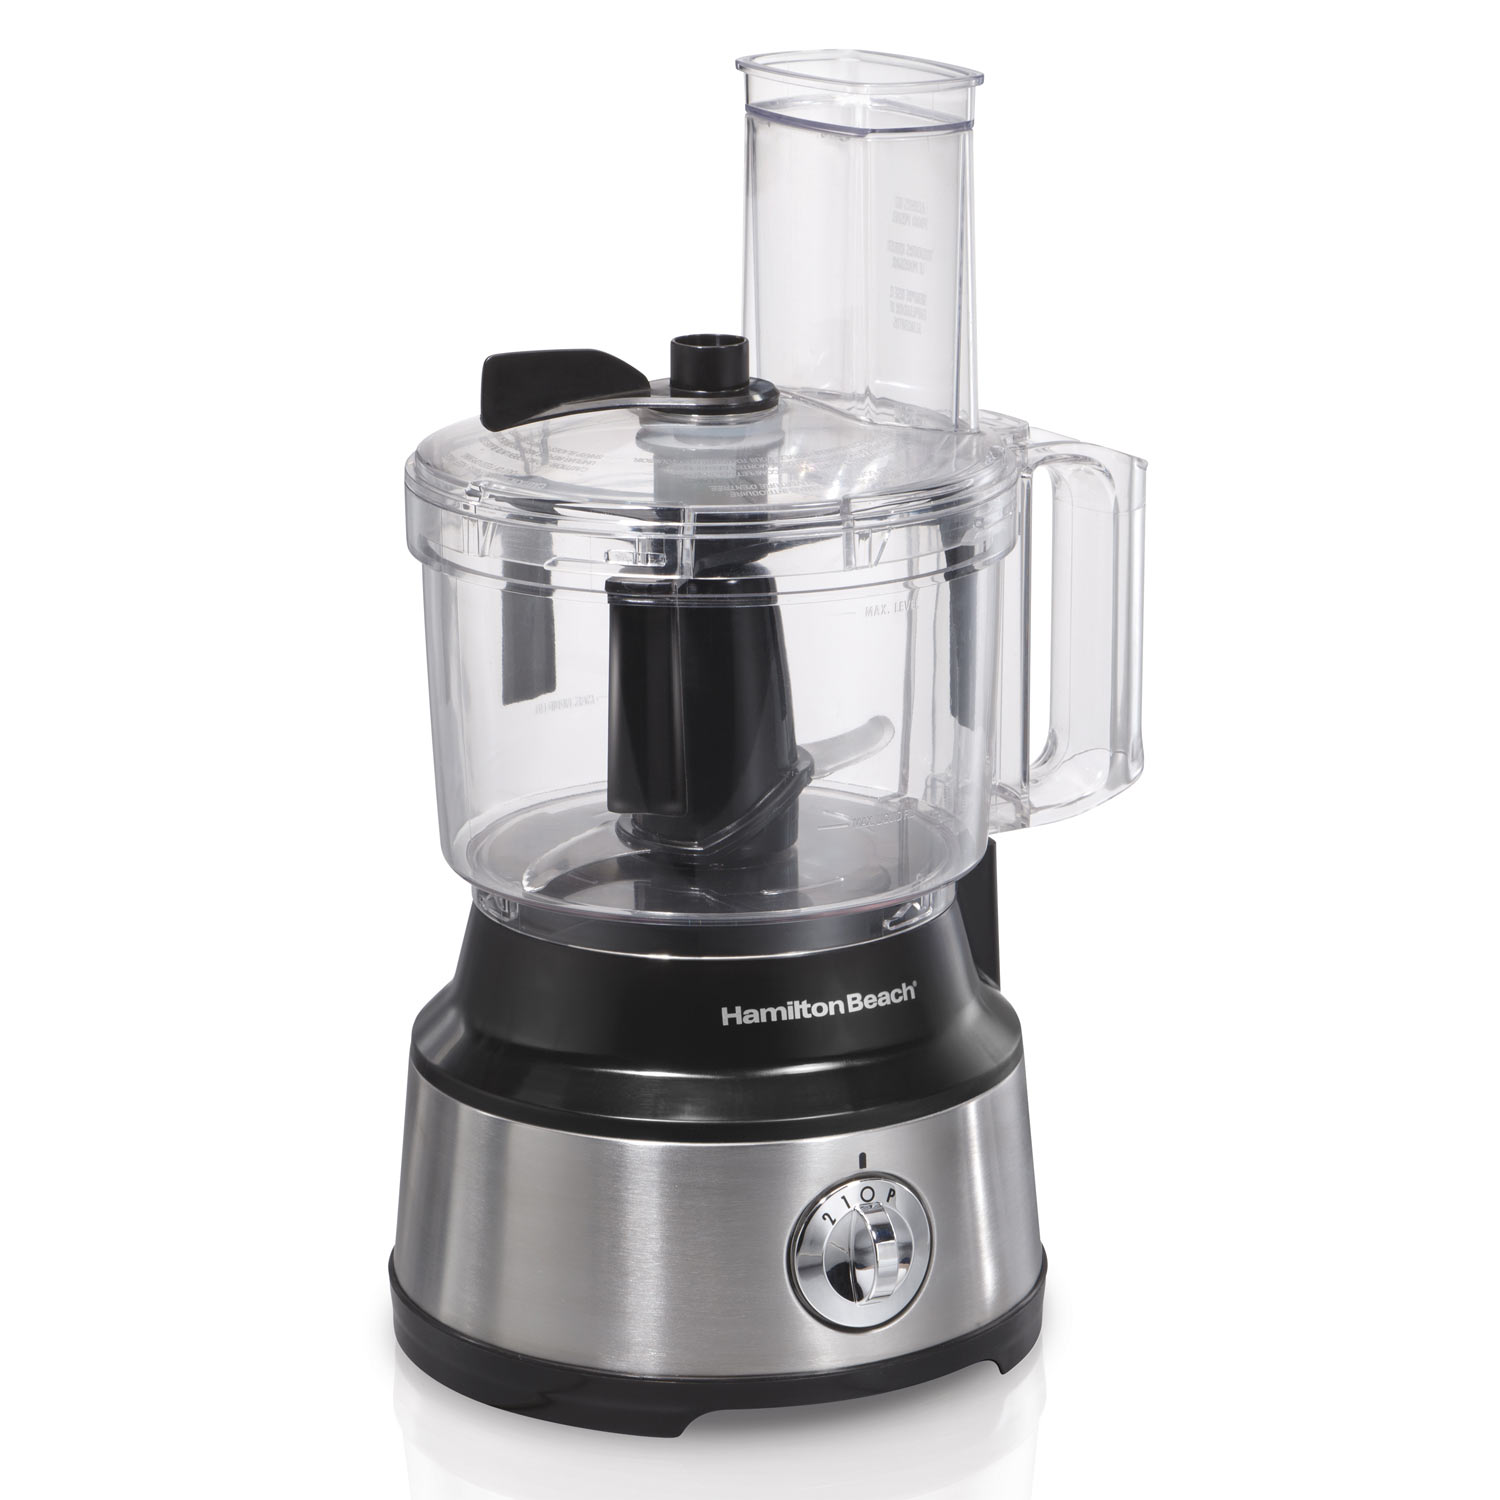 Hamilton Beach 10-Cup Food Processor with Bowl Scraper, Black & Stainless - 70730